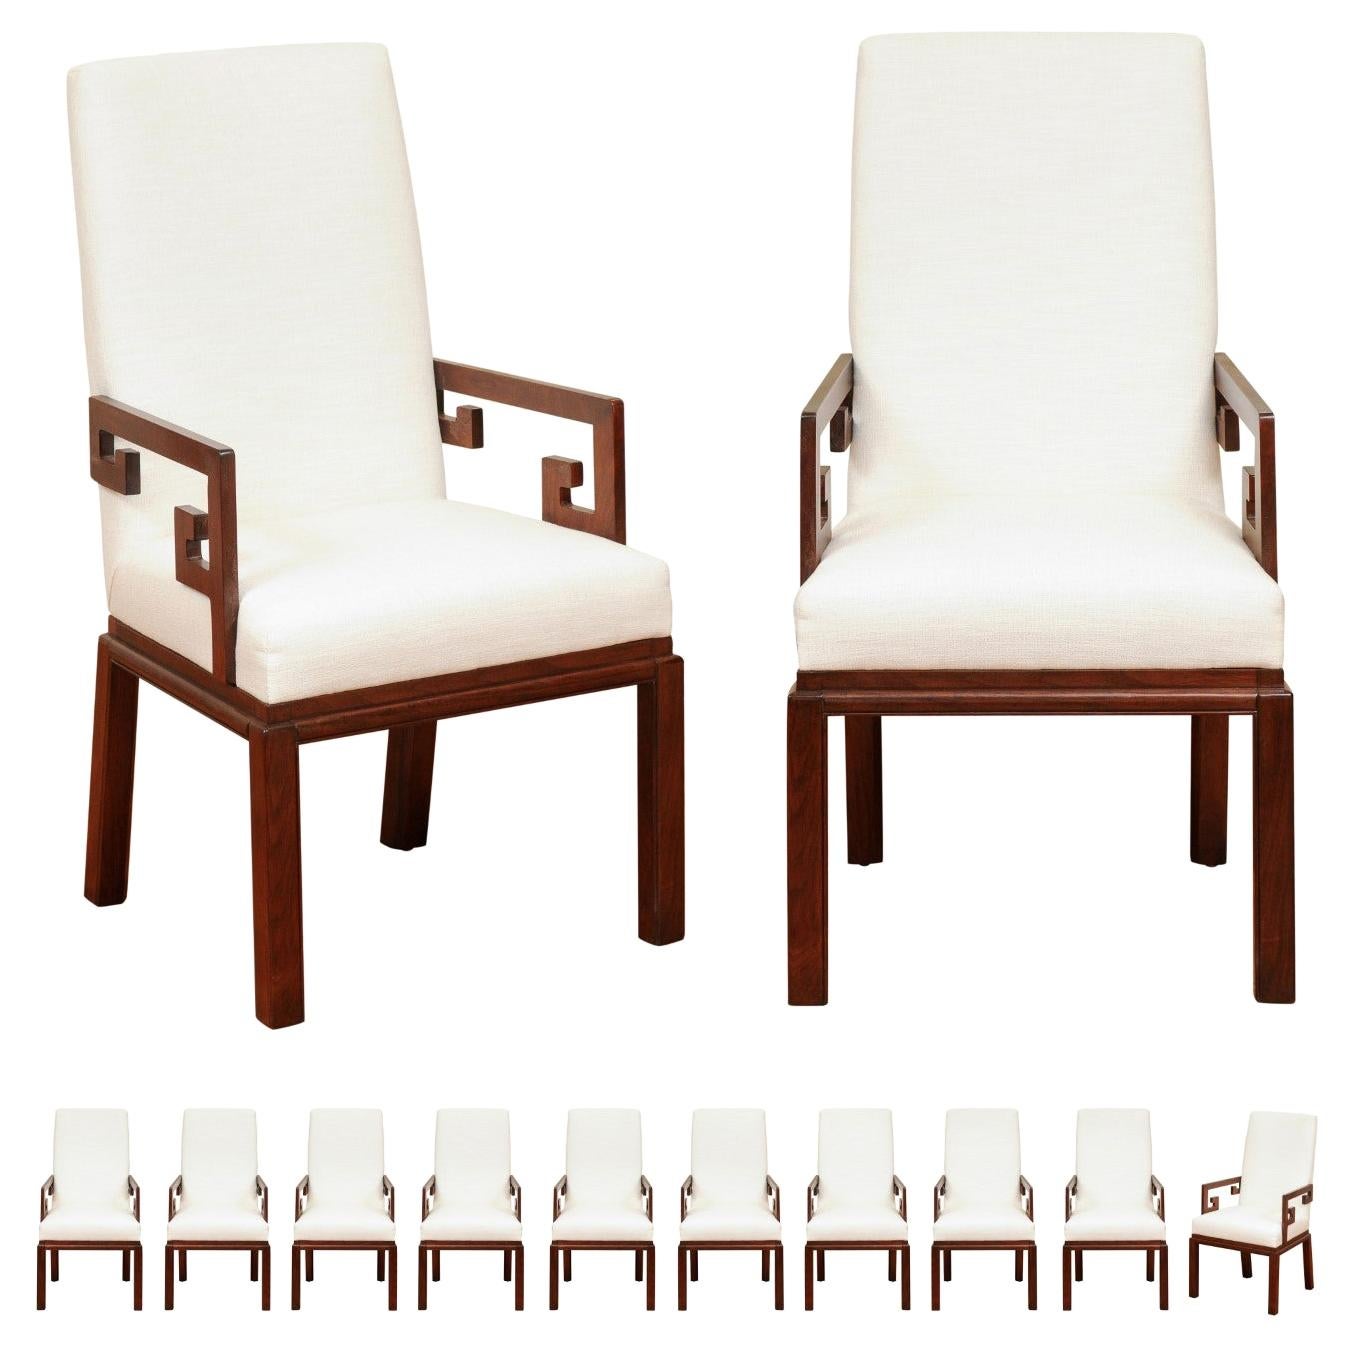 All Arms - Sublime Set of 12 Greek Key Chairs by Michael Taylor, circa 1970